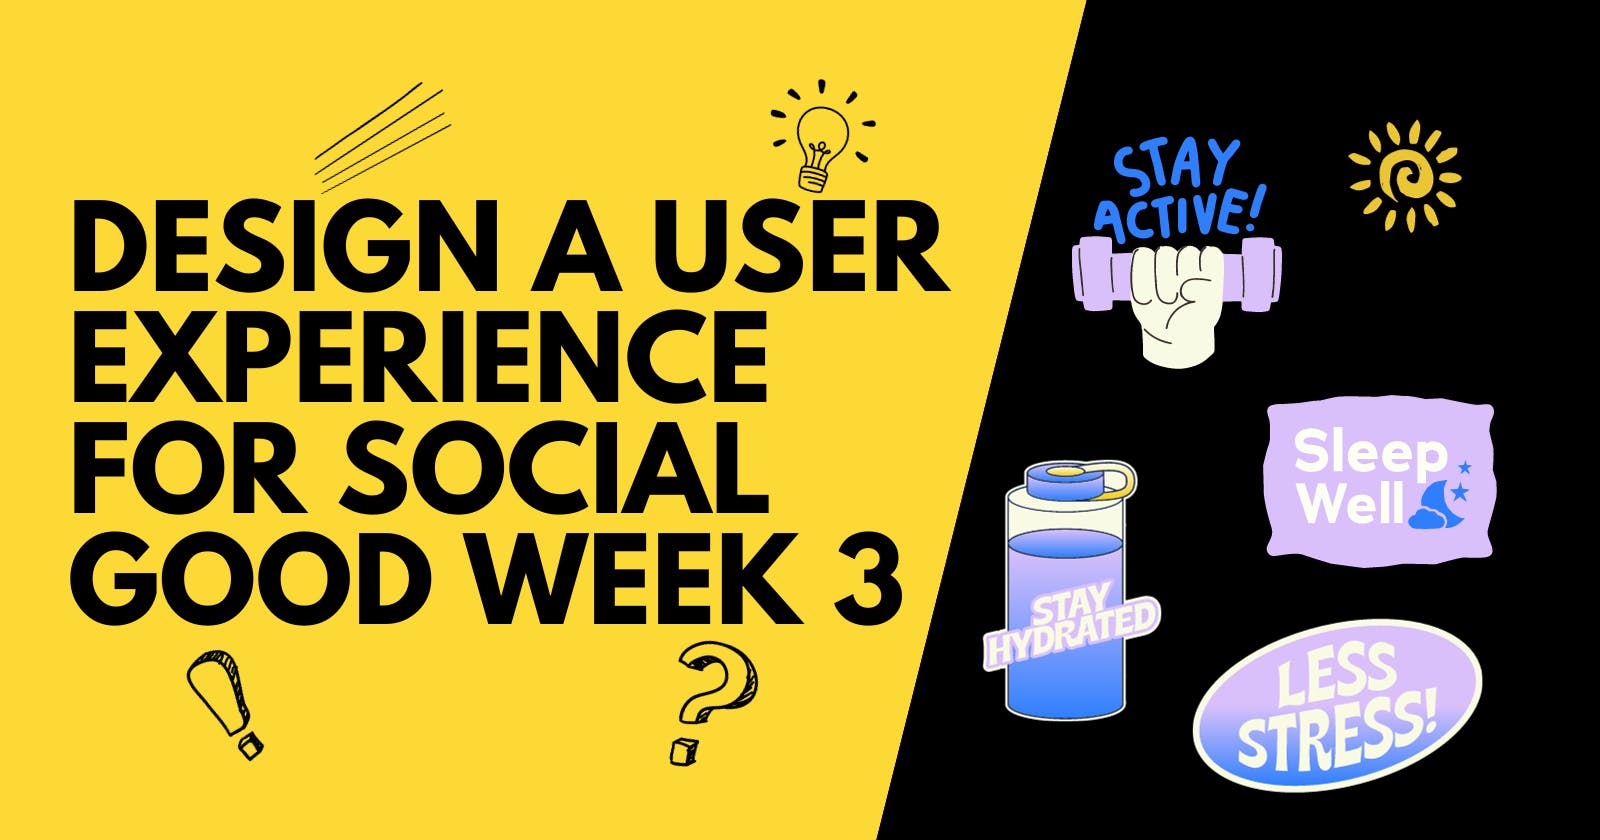 Design a User Experience for Social Good & Prepare for Jobs Course Journey Week 3